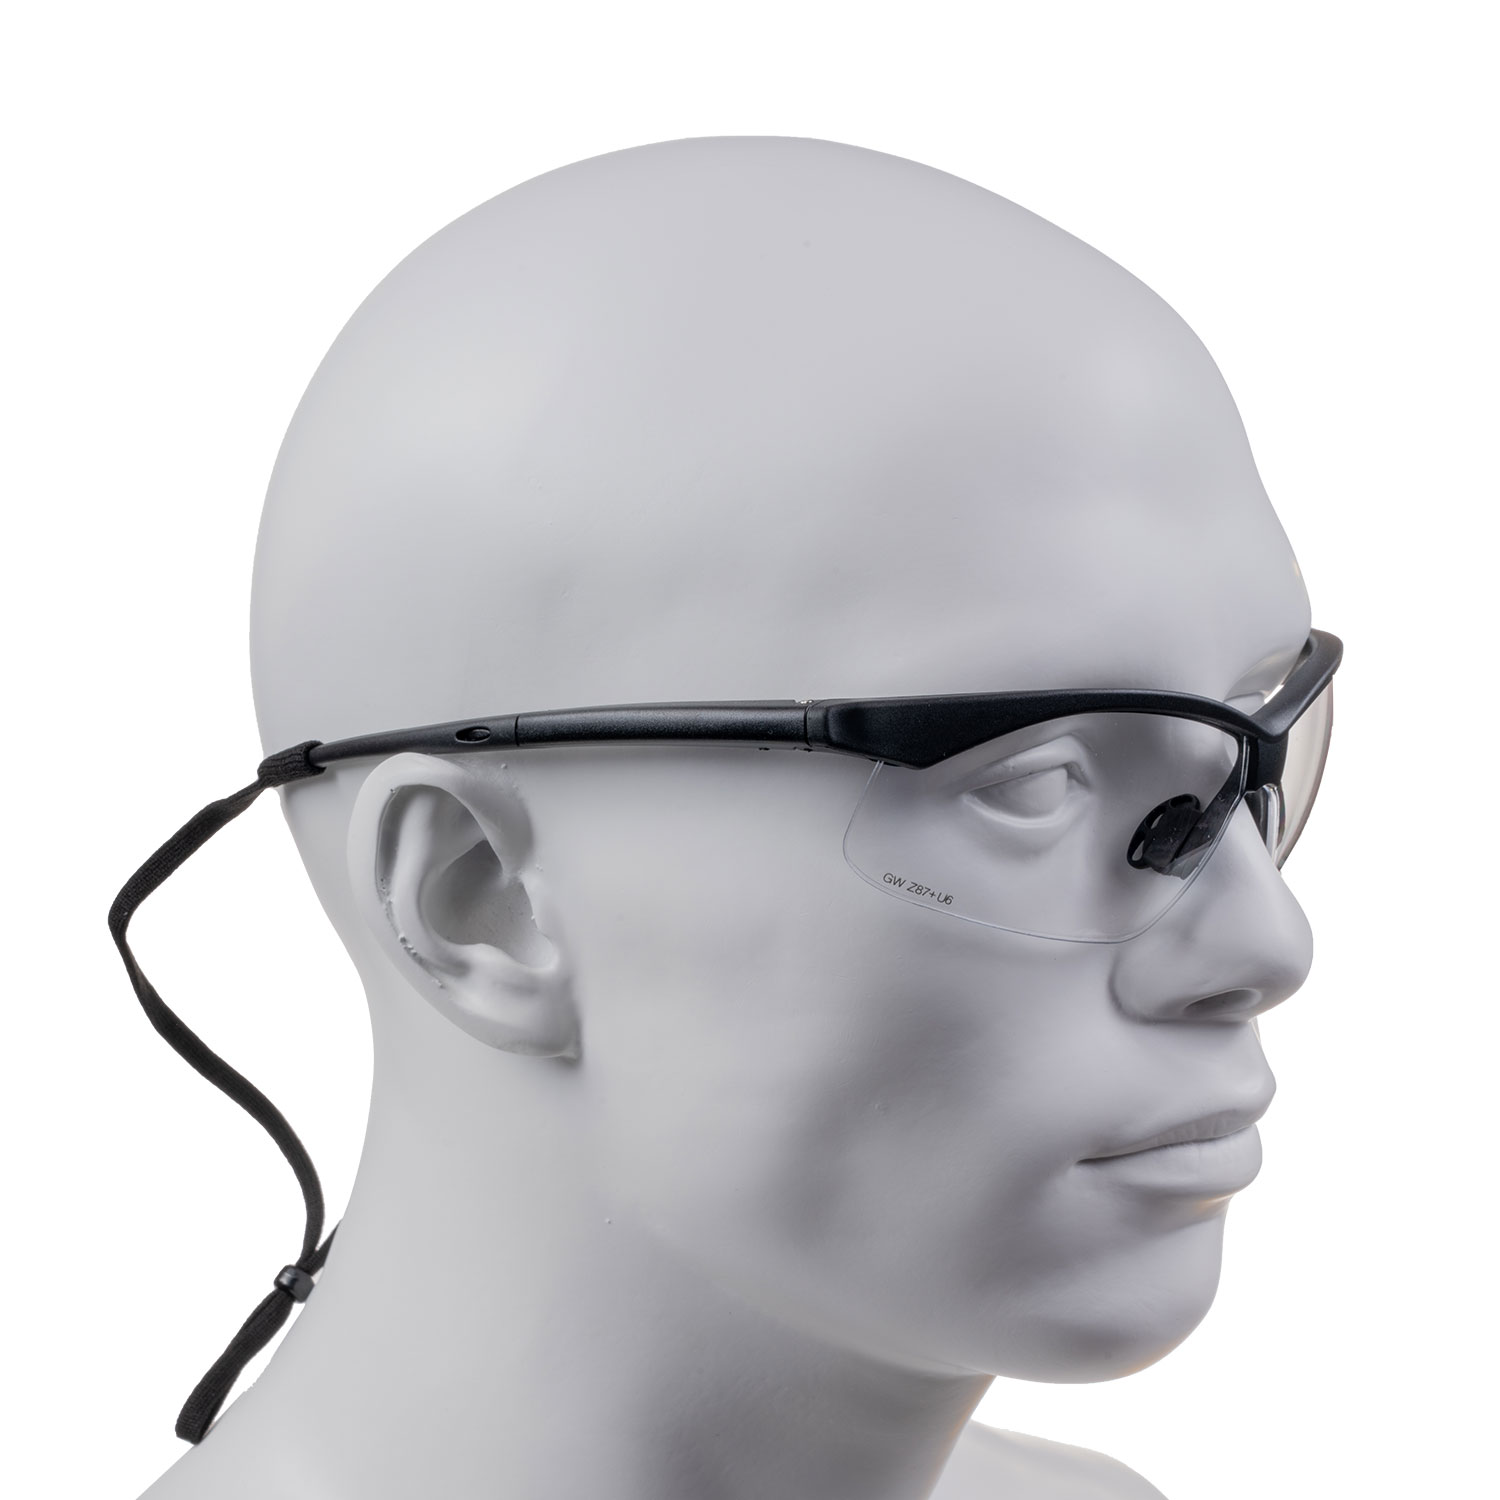 The Convenient Neck Cord Keeps Glasses Always Within Reach. Cool-Looking Rival Safety Glasses Will Appeal to All Workers Palmer Grey//Hard Lens Lightweight